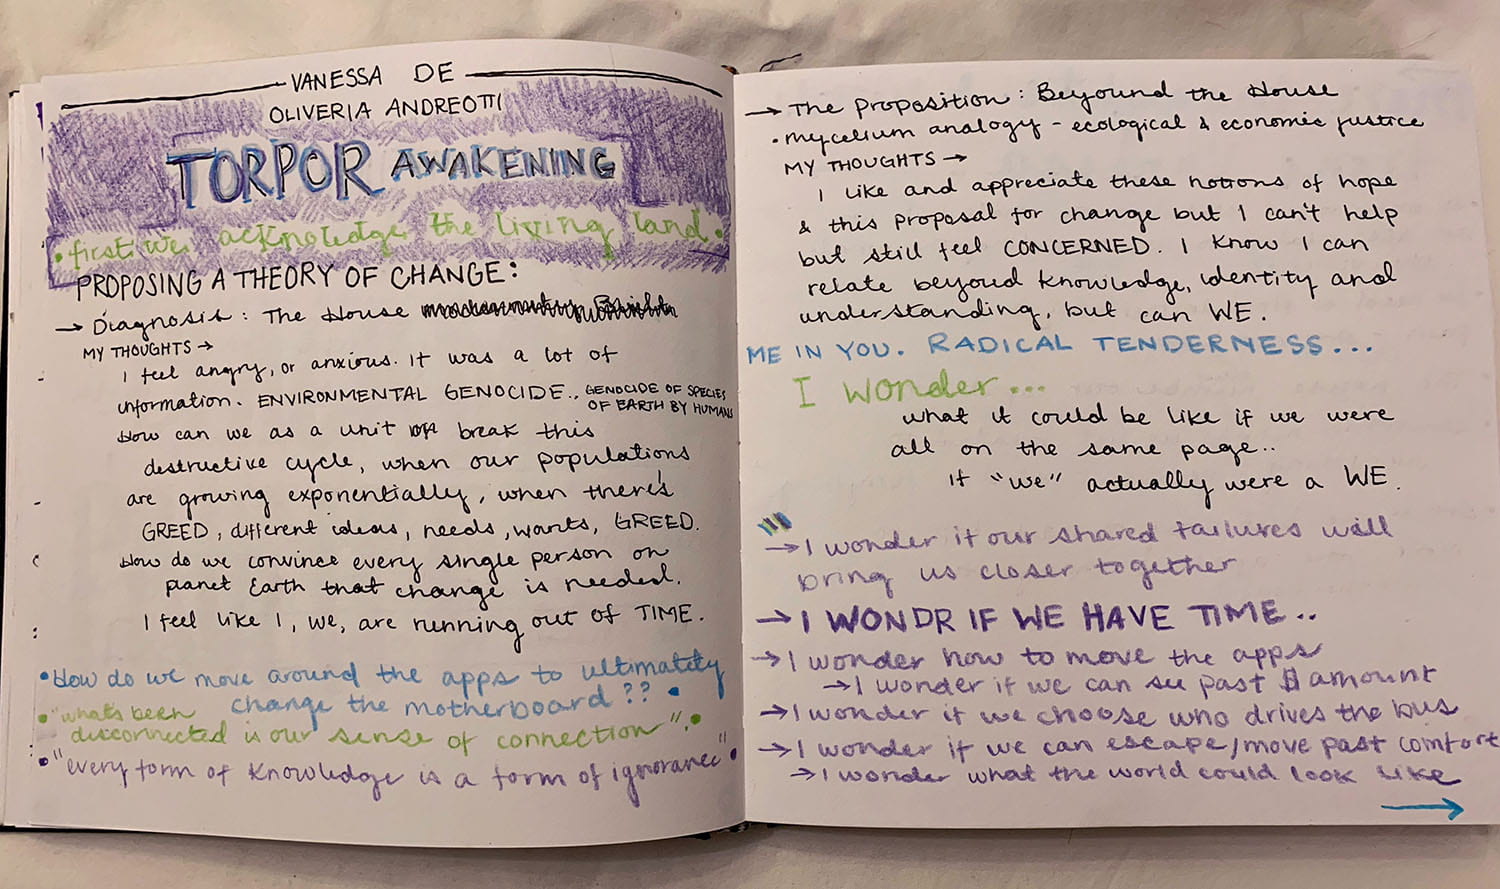 two-page journal entry titled "Vanessa De Oliveria Andreoti: Torpor Awakening" and filled with wondering notes about bringing change to an endangered environment